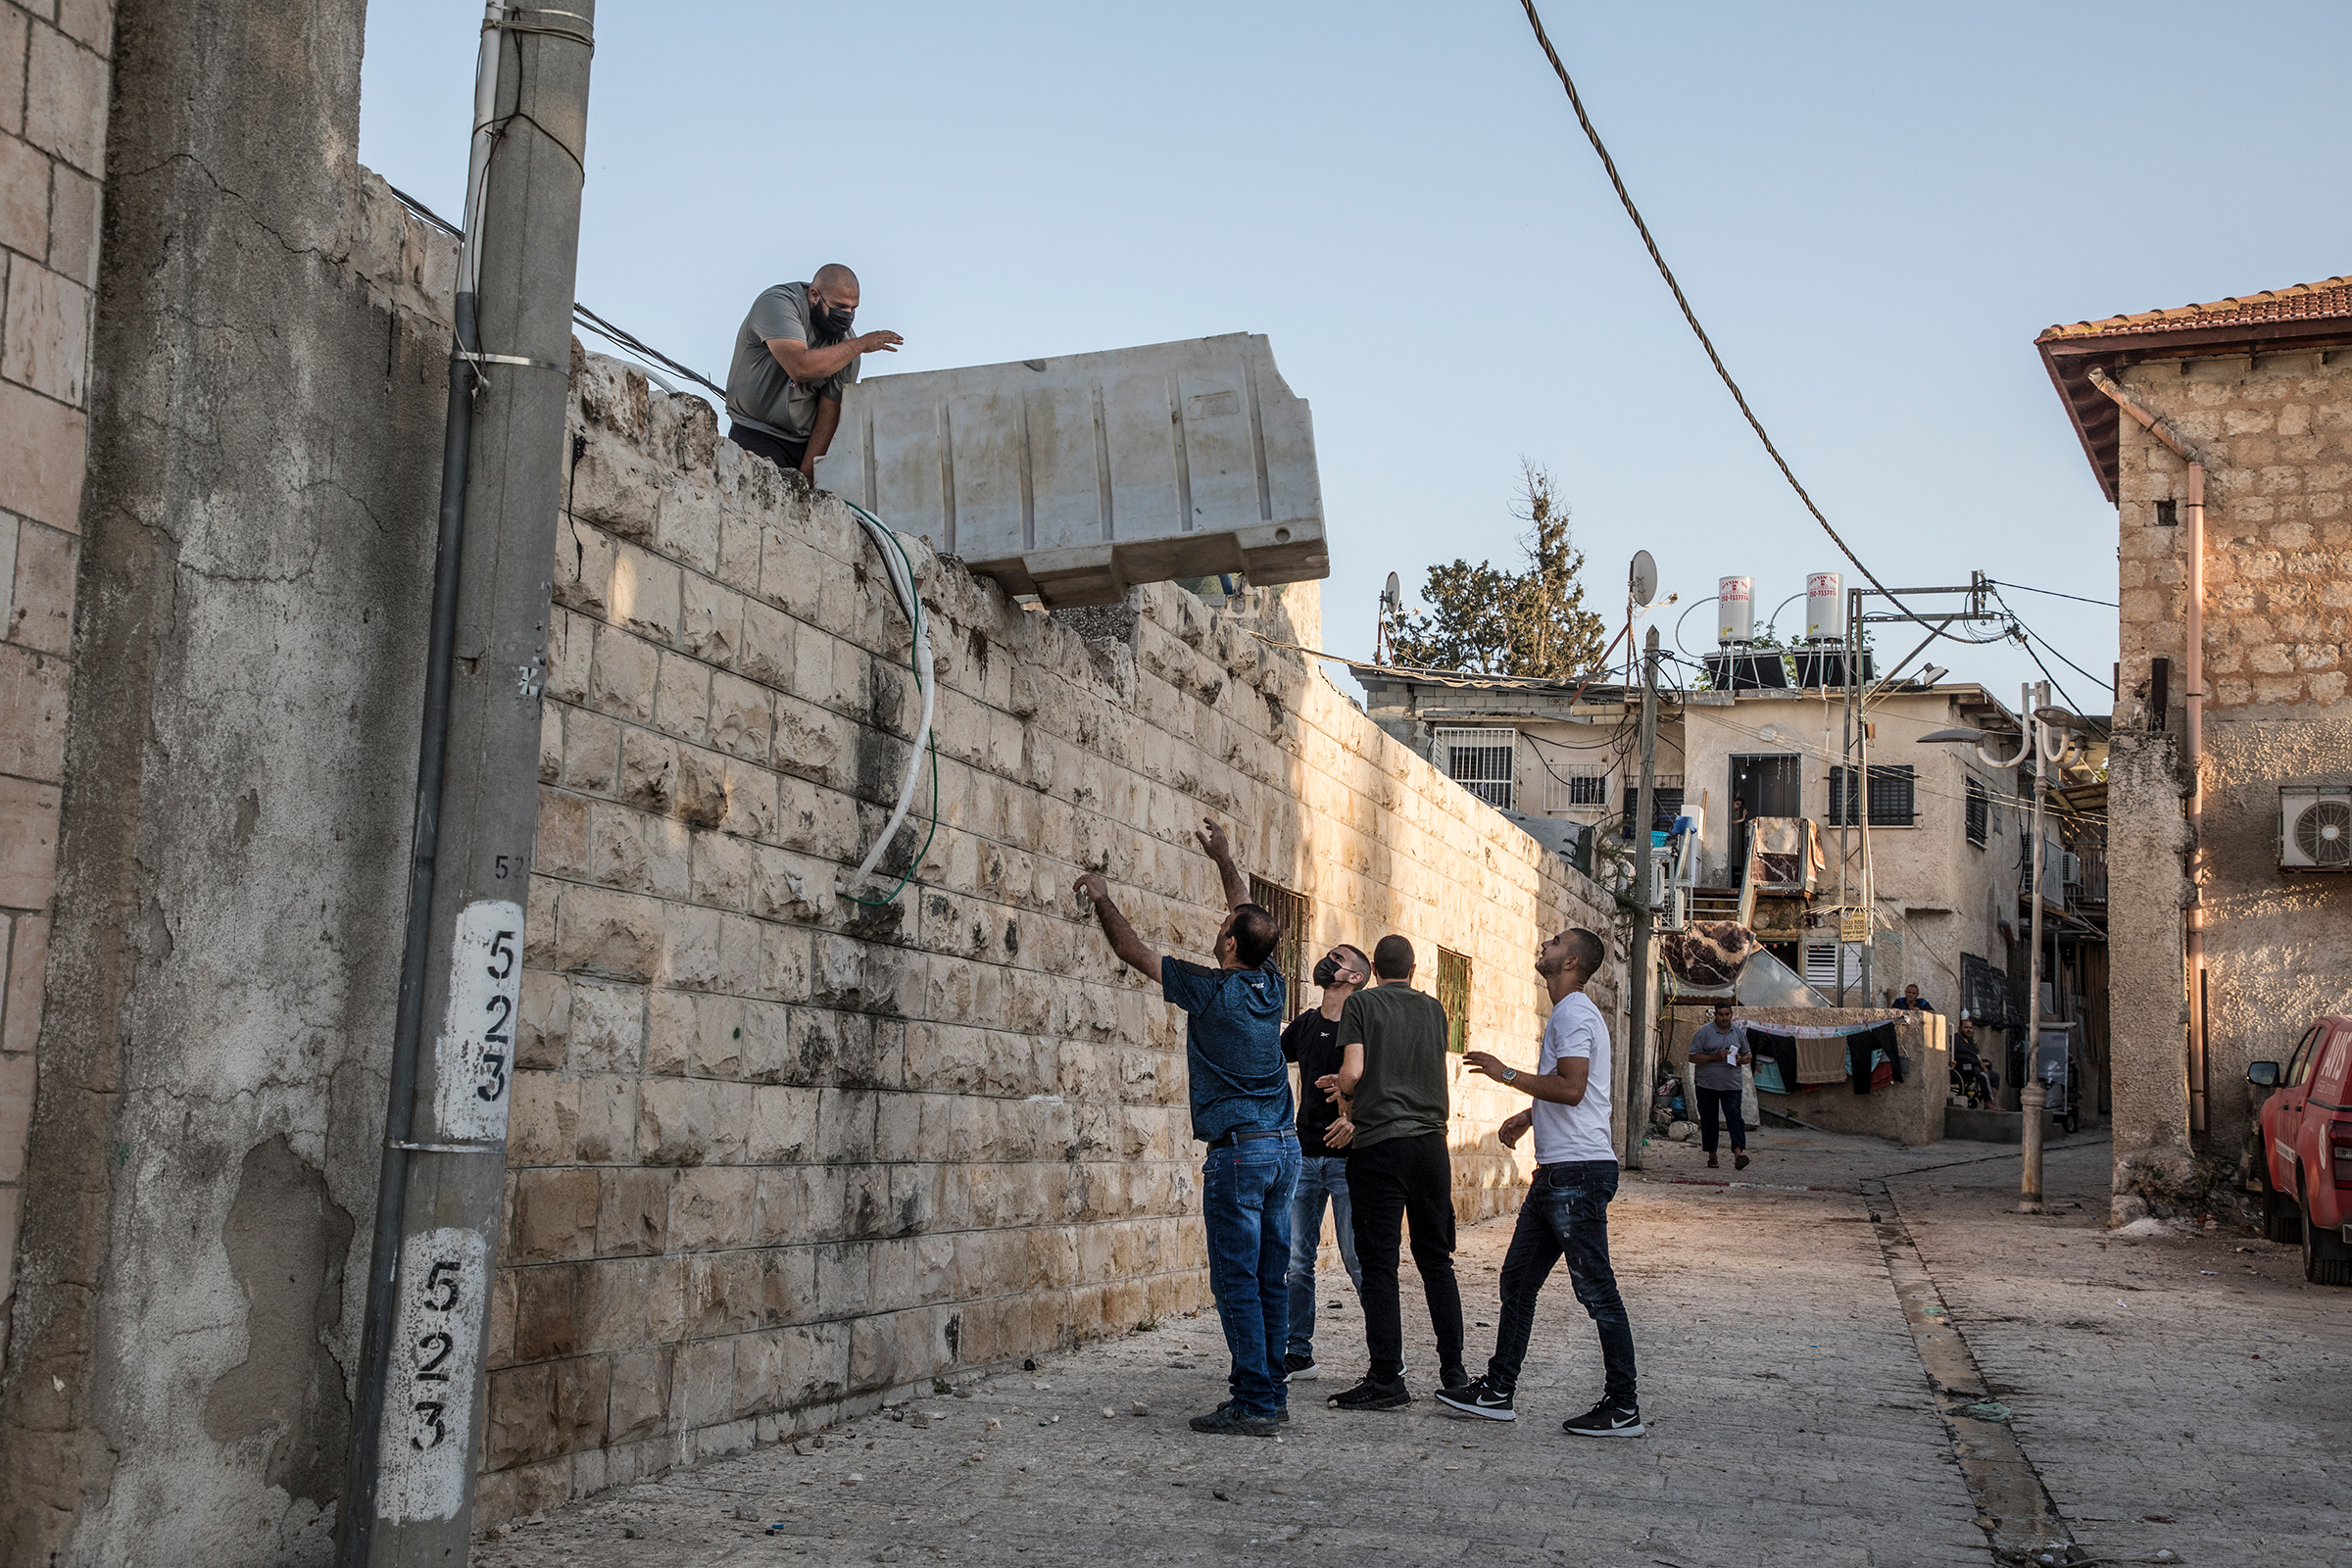 At the mosque in the old city center of Lod, young Palestinians gather on the roof to prepare their defense before expected clashes on May 12, 2021.